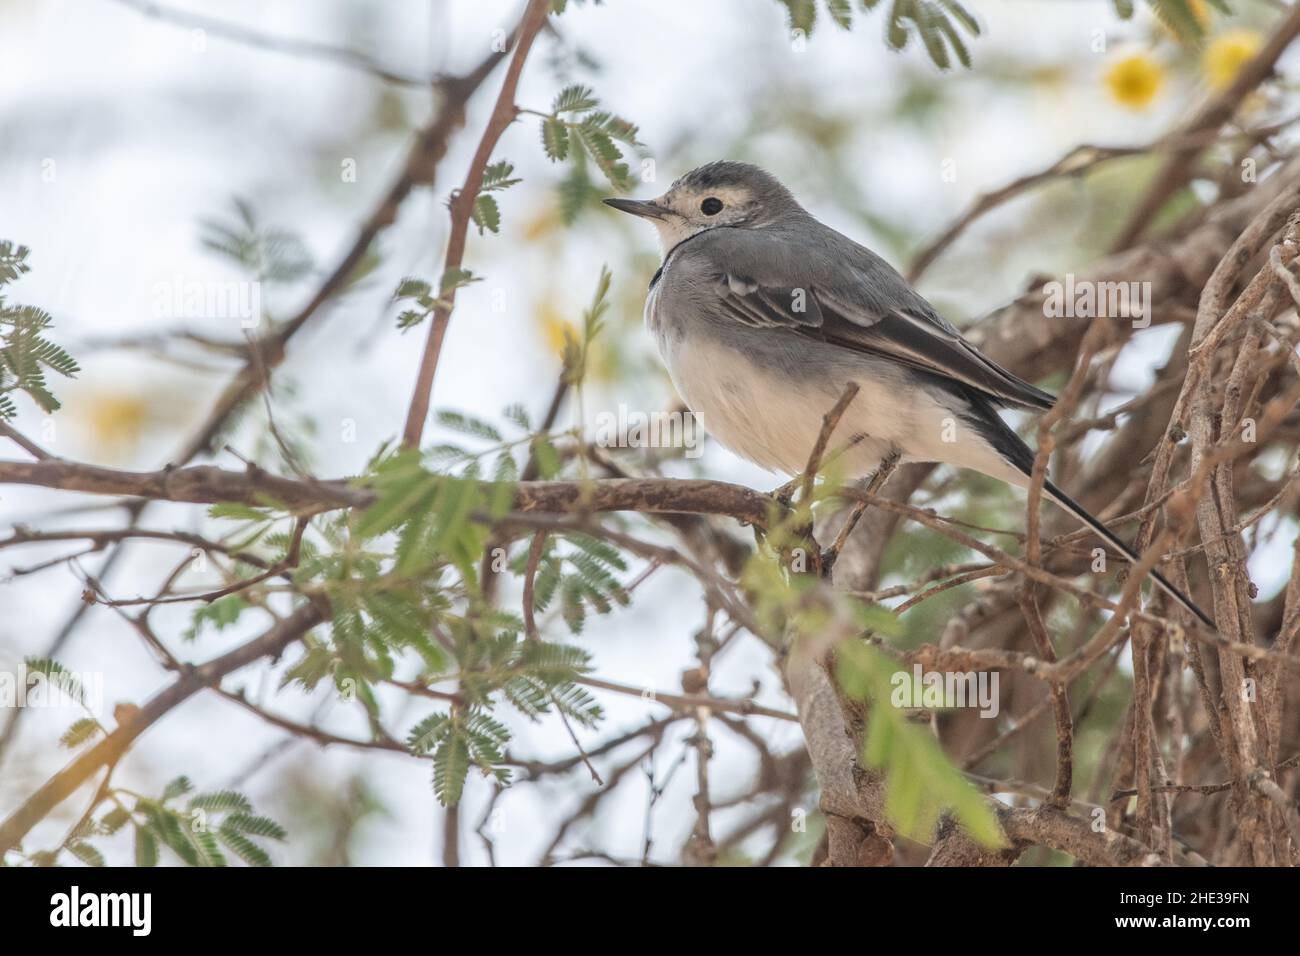 The white wagtail (Motacilla alba) a migratory bird common across much of Eurasia, this individual was seen in Southern Egypt near the Sudan border. Stock Photo